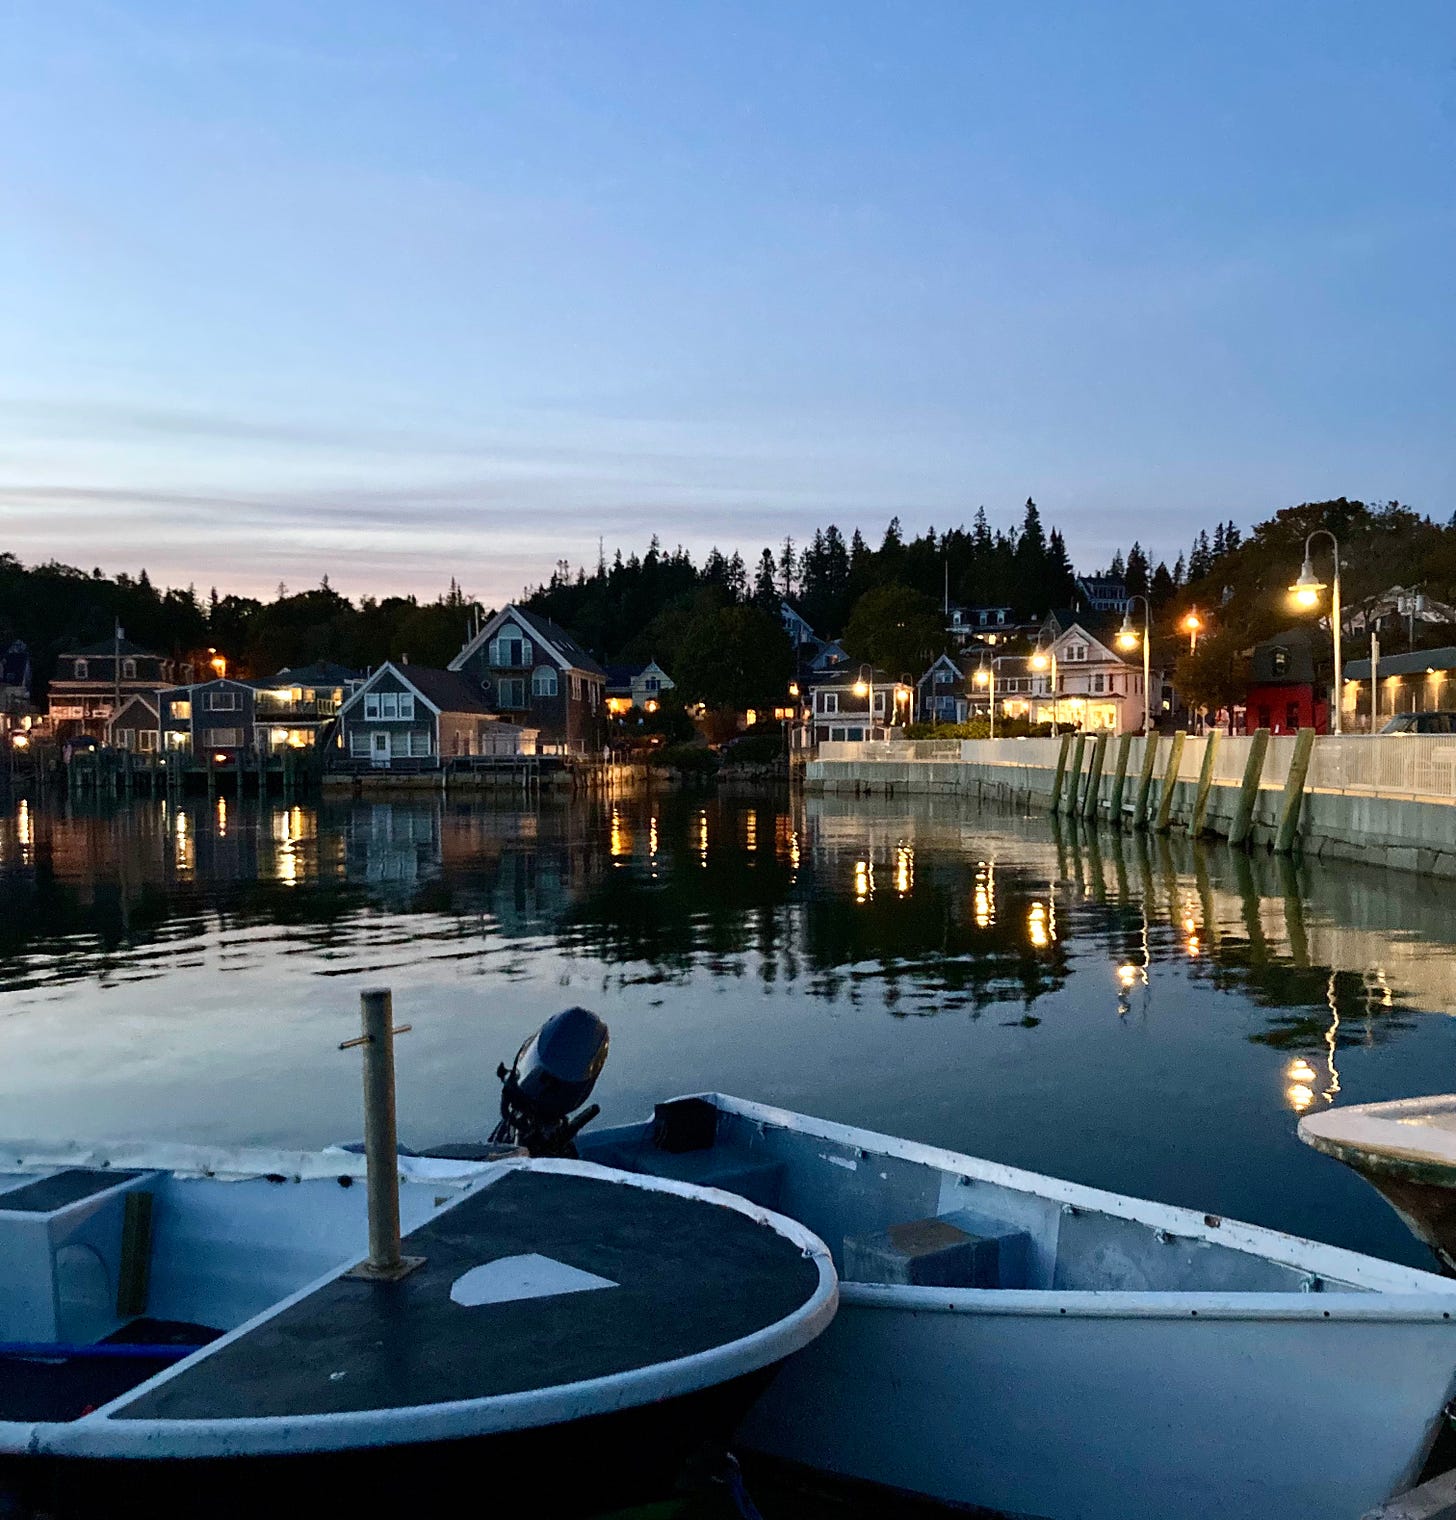 Downtown Stonington, just after sunset. There are two small boats in the water in the foreground, and yellow lights and streetlamps in the background.